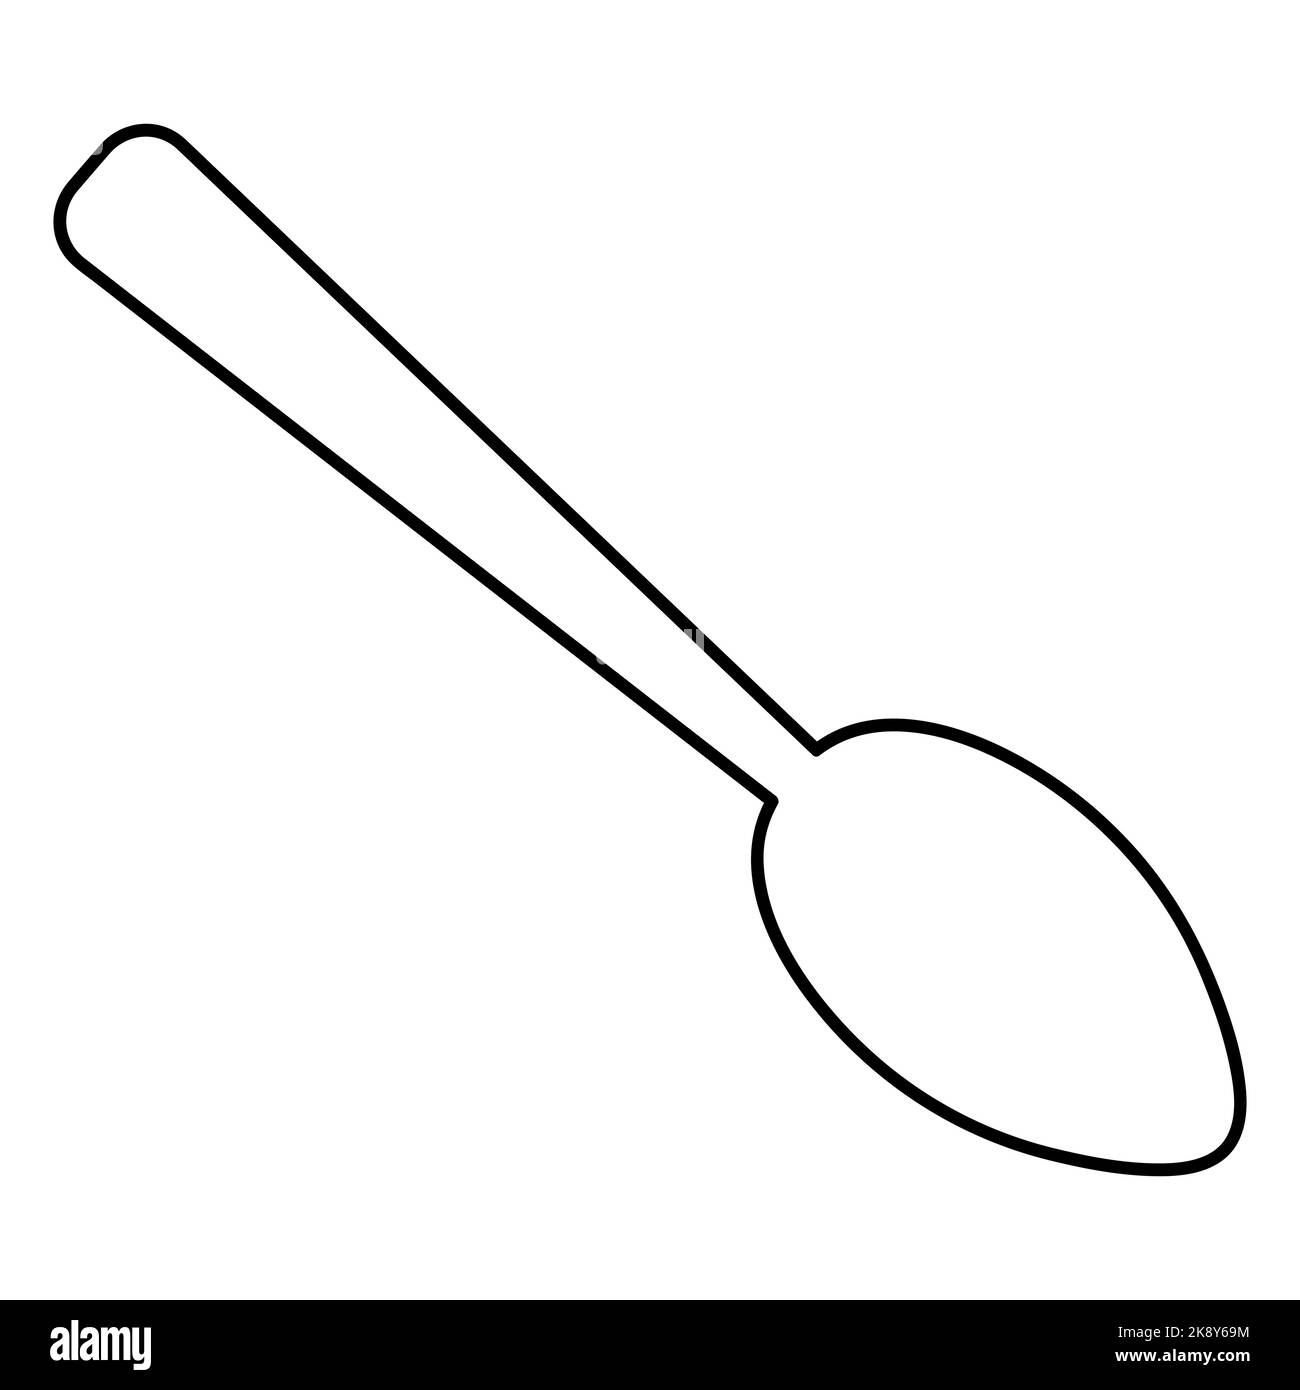 Spoon for food. Sketch. Tool for eating. Vector illustration. Outline on isolated white background. Doodle style. The cutlery consists of a handle Stock Vector